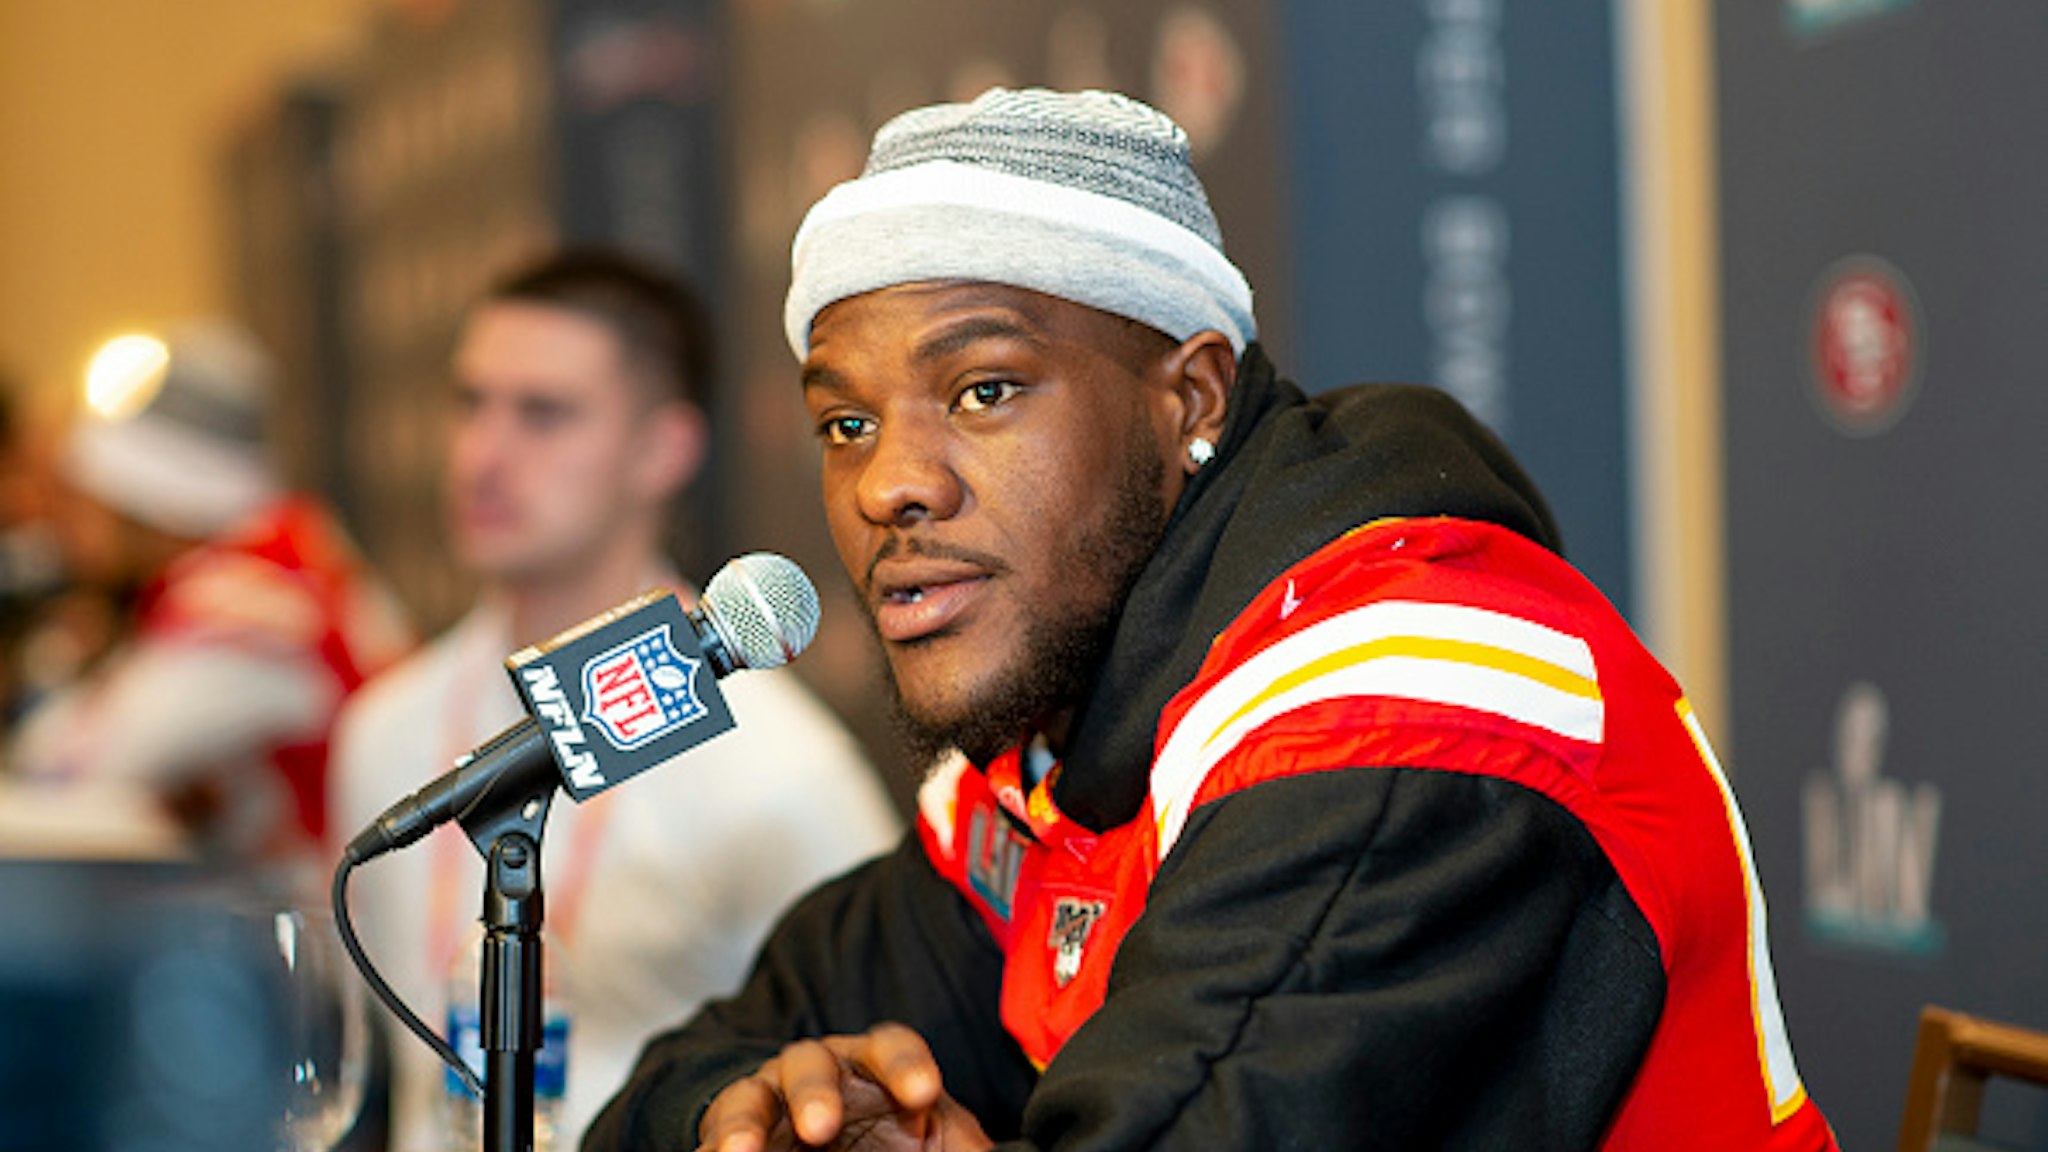 AVENTURA, FL - JANUARY 29: Kansas City Chiefs Defensive End Frank Clark (55) speaks to the media during the Kansas City Chiefs press conference prior to Super Bowl LIV on January 29, 2020 at the JW Marriott Miami Turnberry Resort &amp; Spa in Aventura, FL.